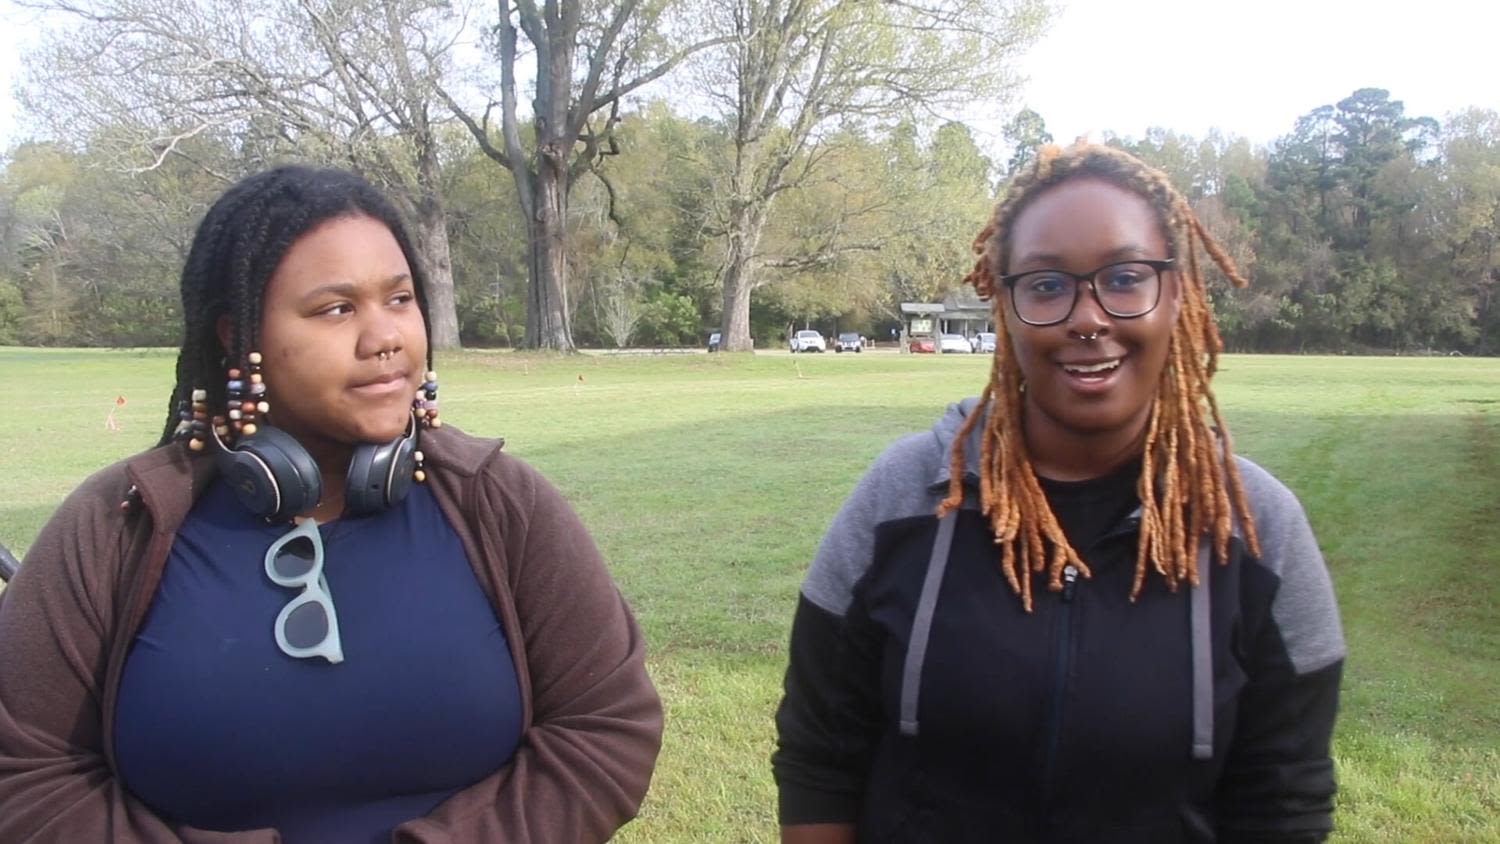 Film features SC State, Claflin students’ archeological work at Redcliffe Plantation